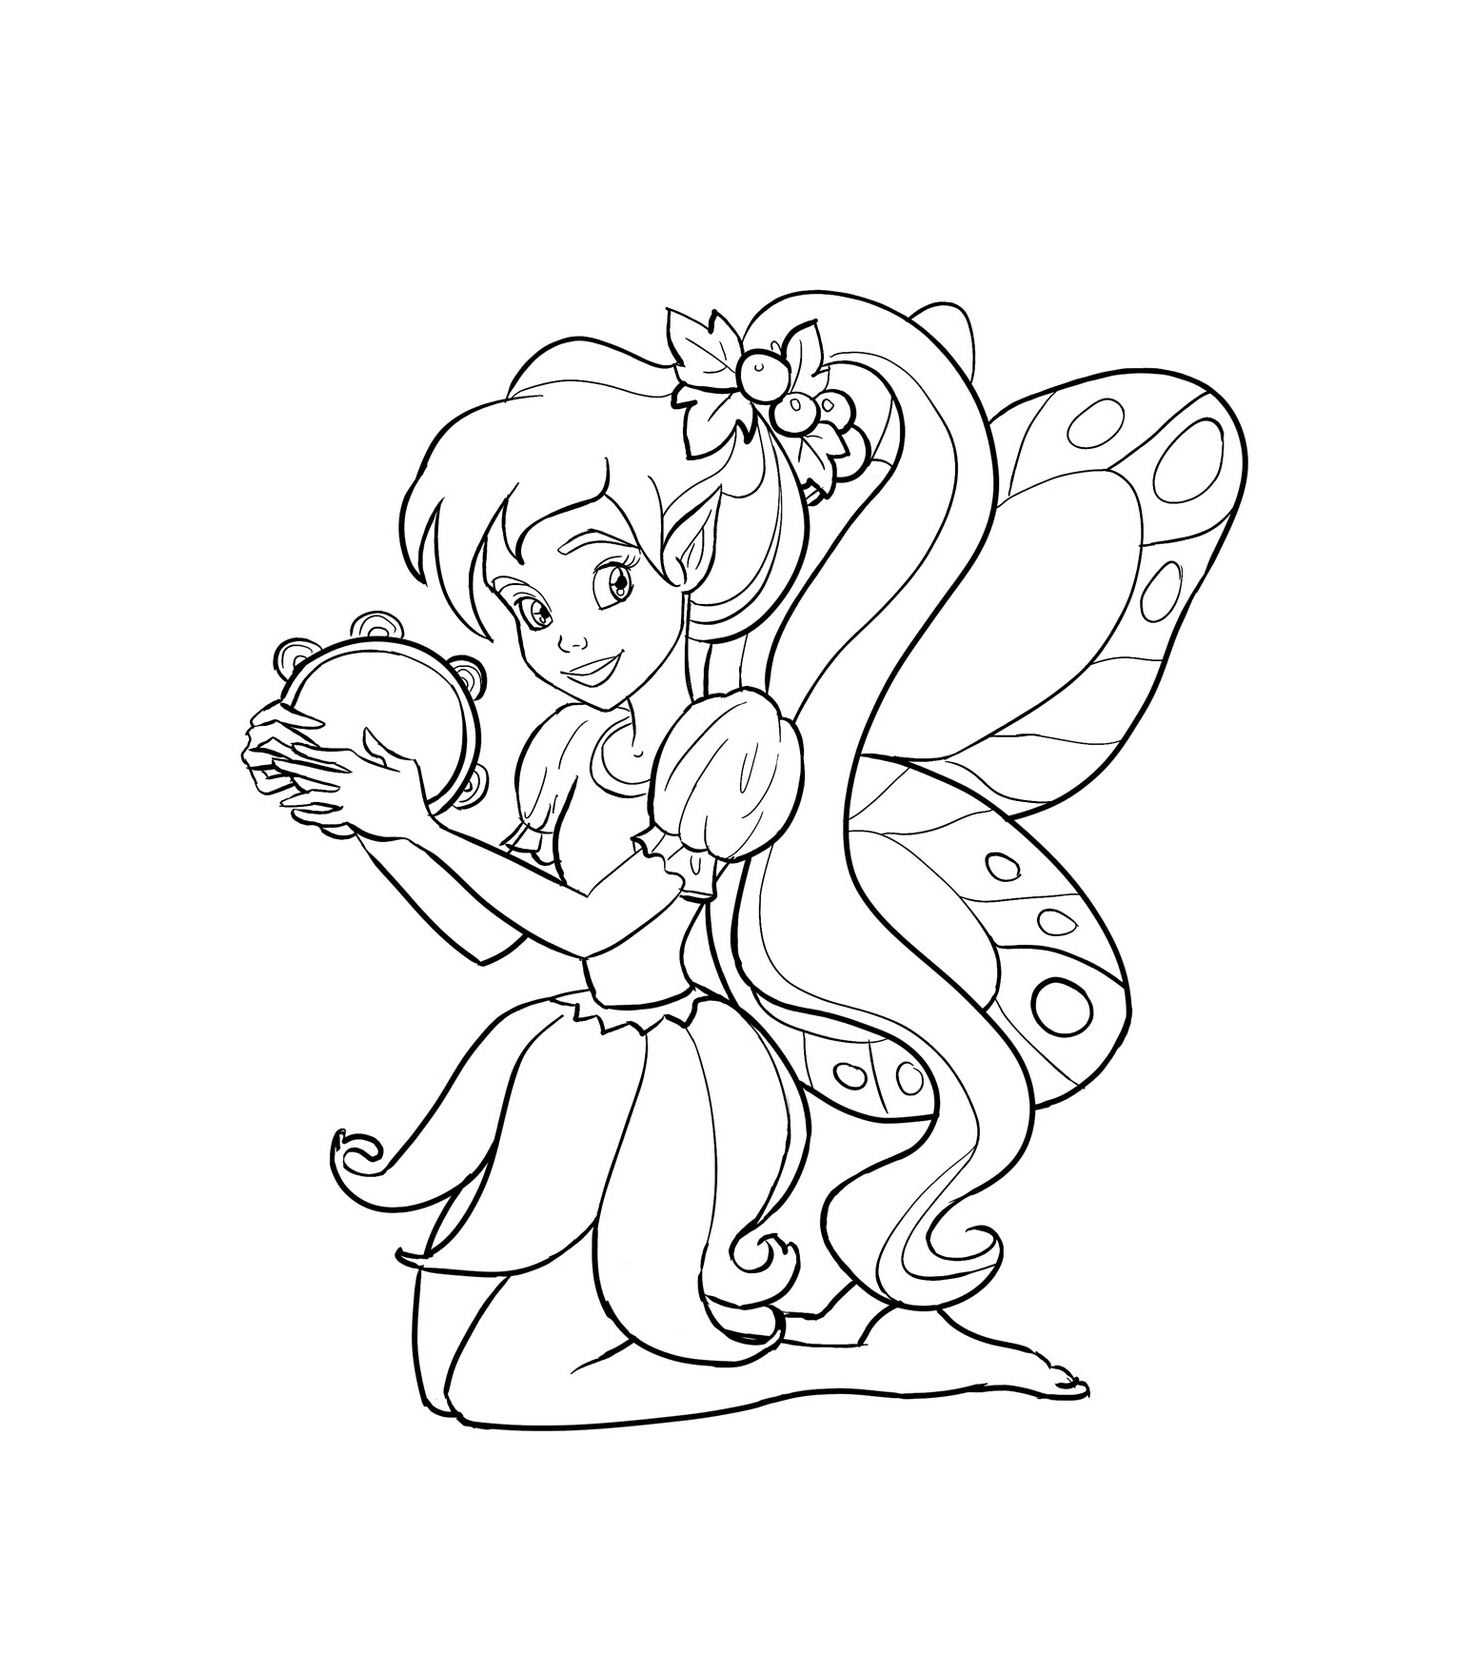 Fairy coloring page to download for free